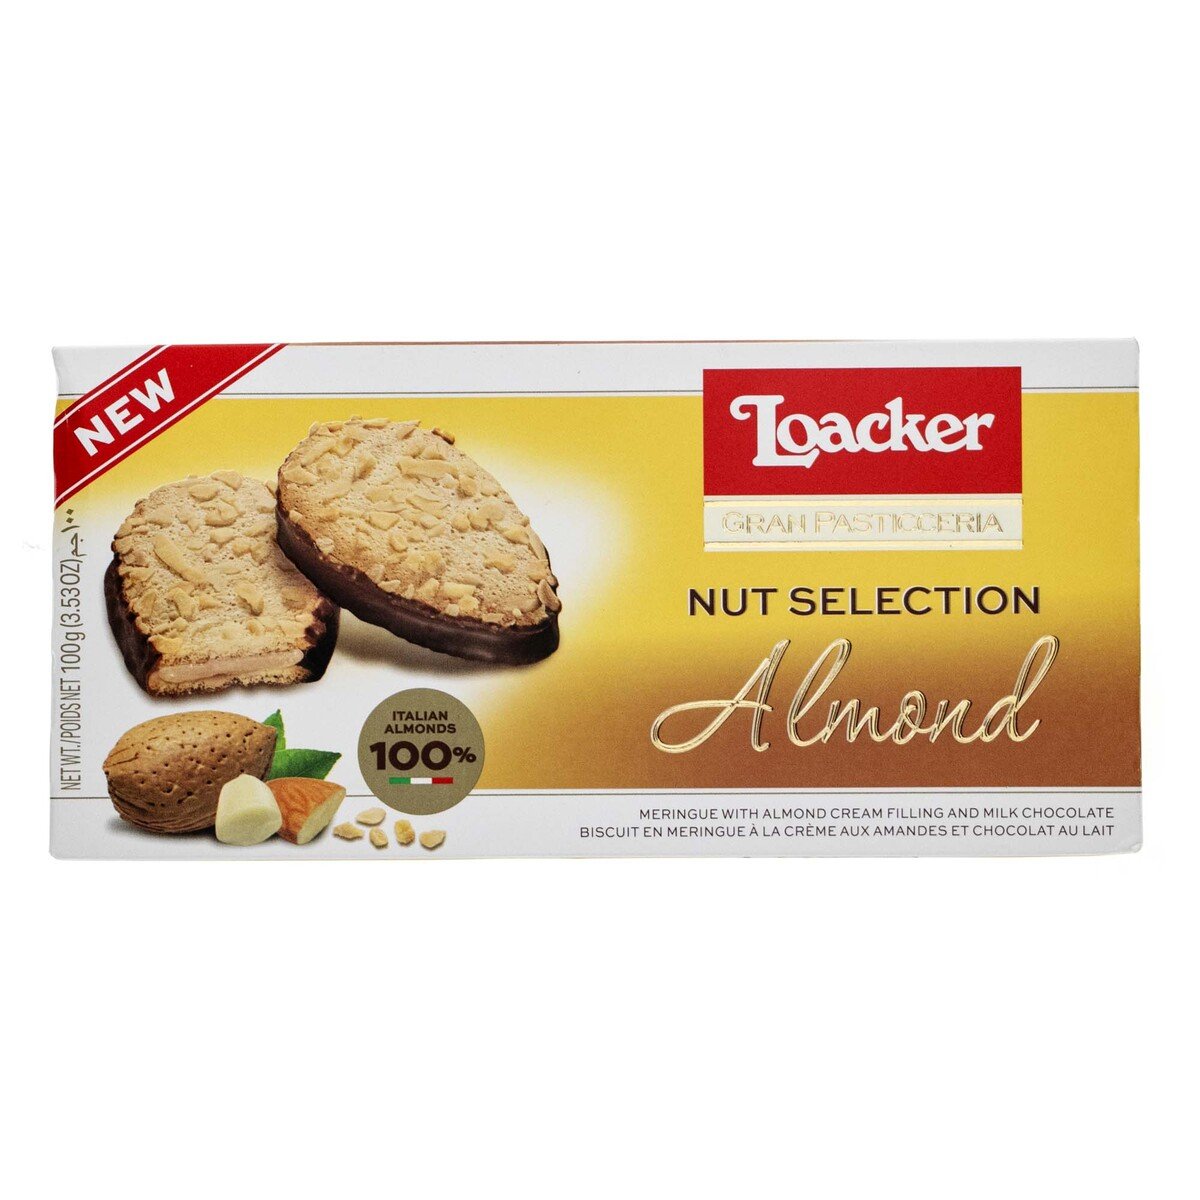 Loacker Nut Selection Almond Biscuits 100 g